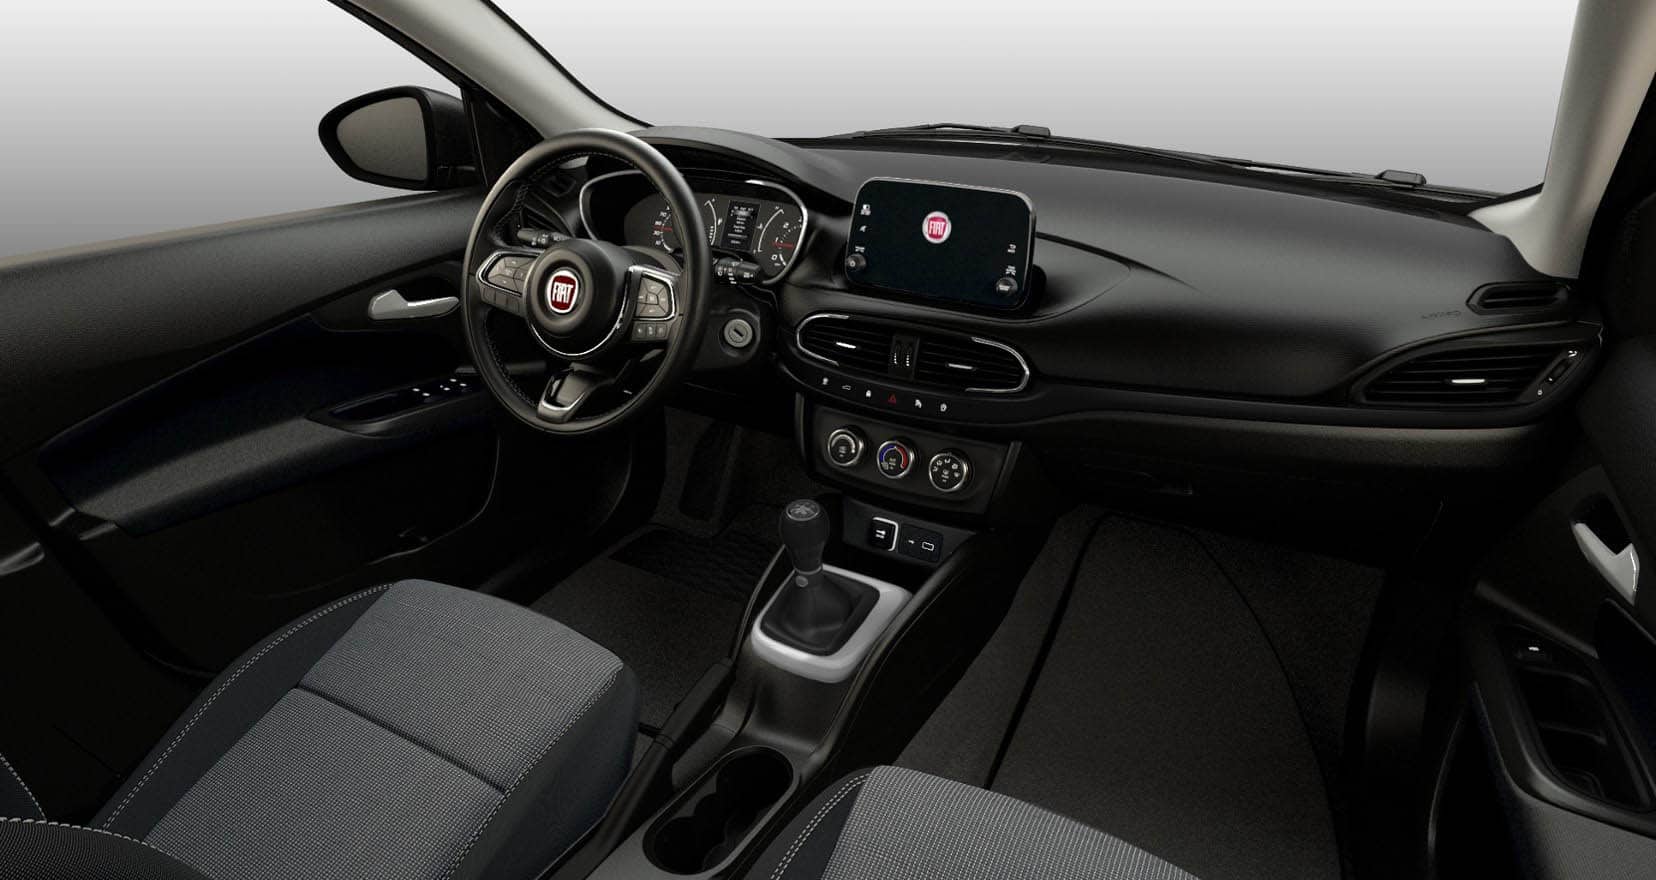 The Fiat Type Sedan, now more equipped and at a better price